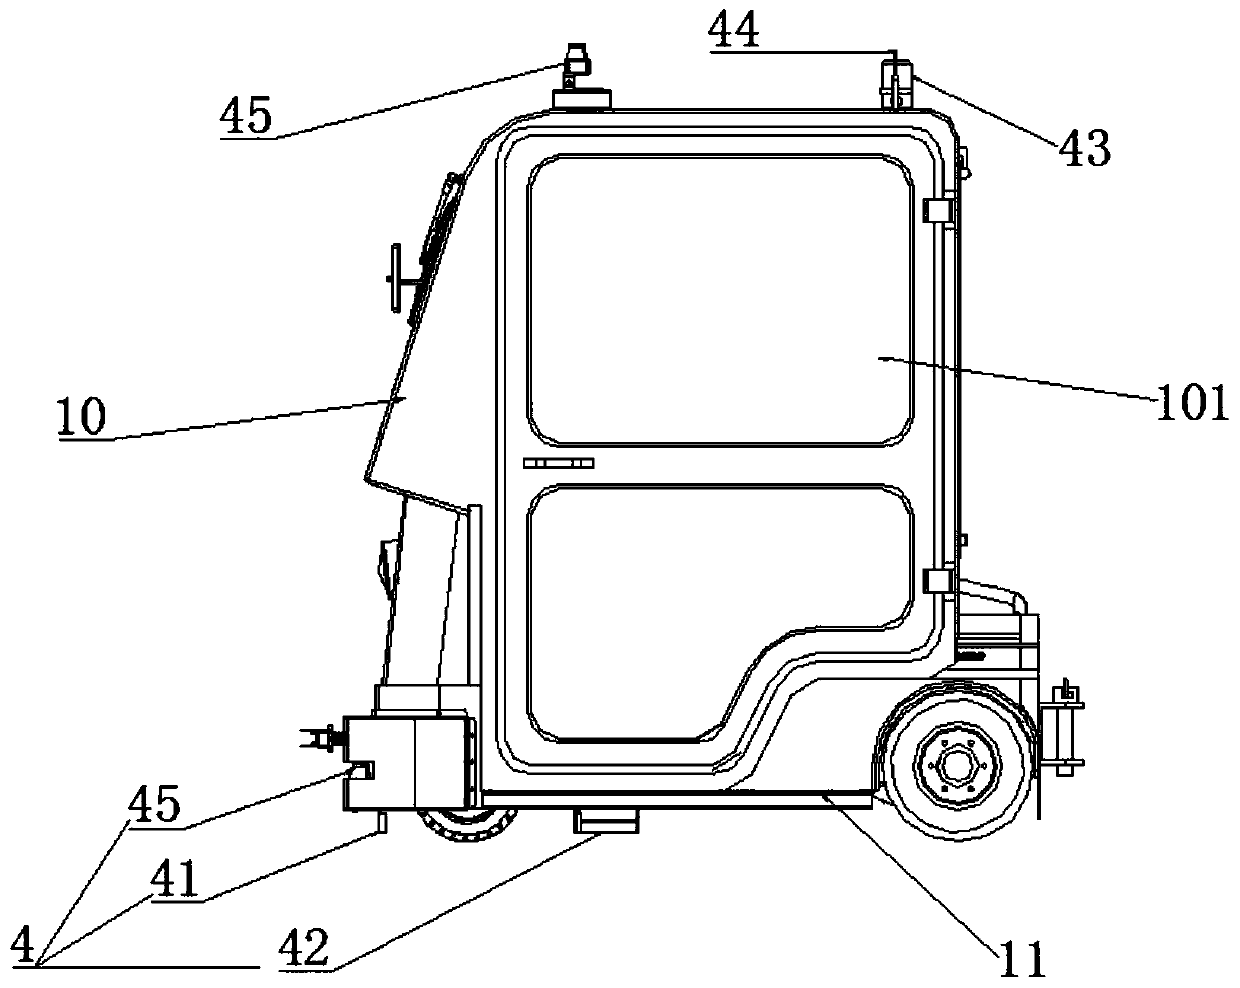 Vehicle capable of automatically controlling running